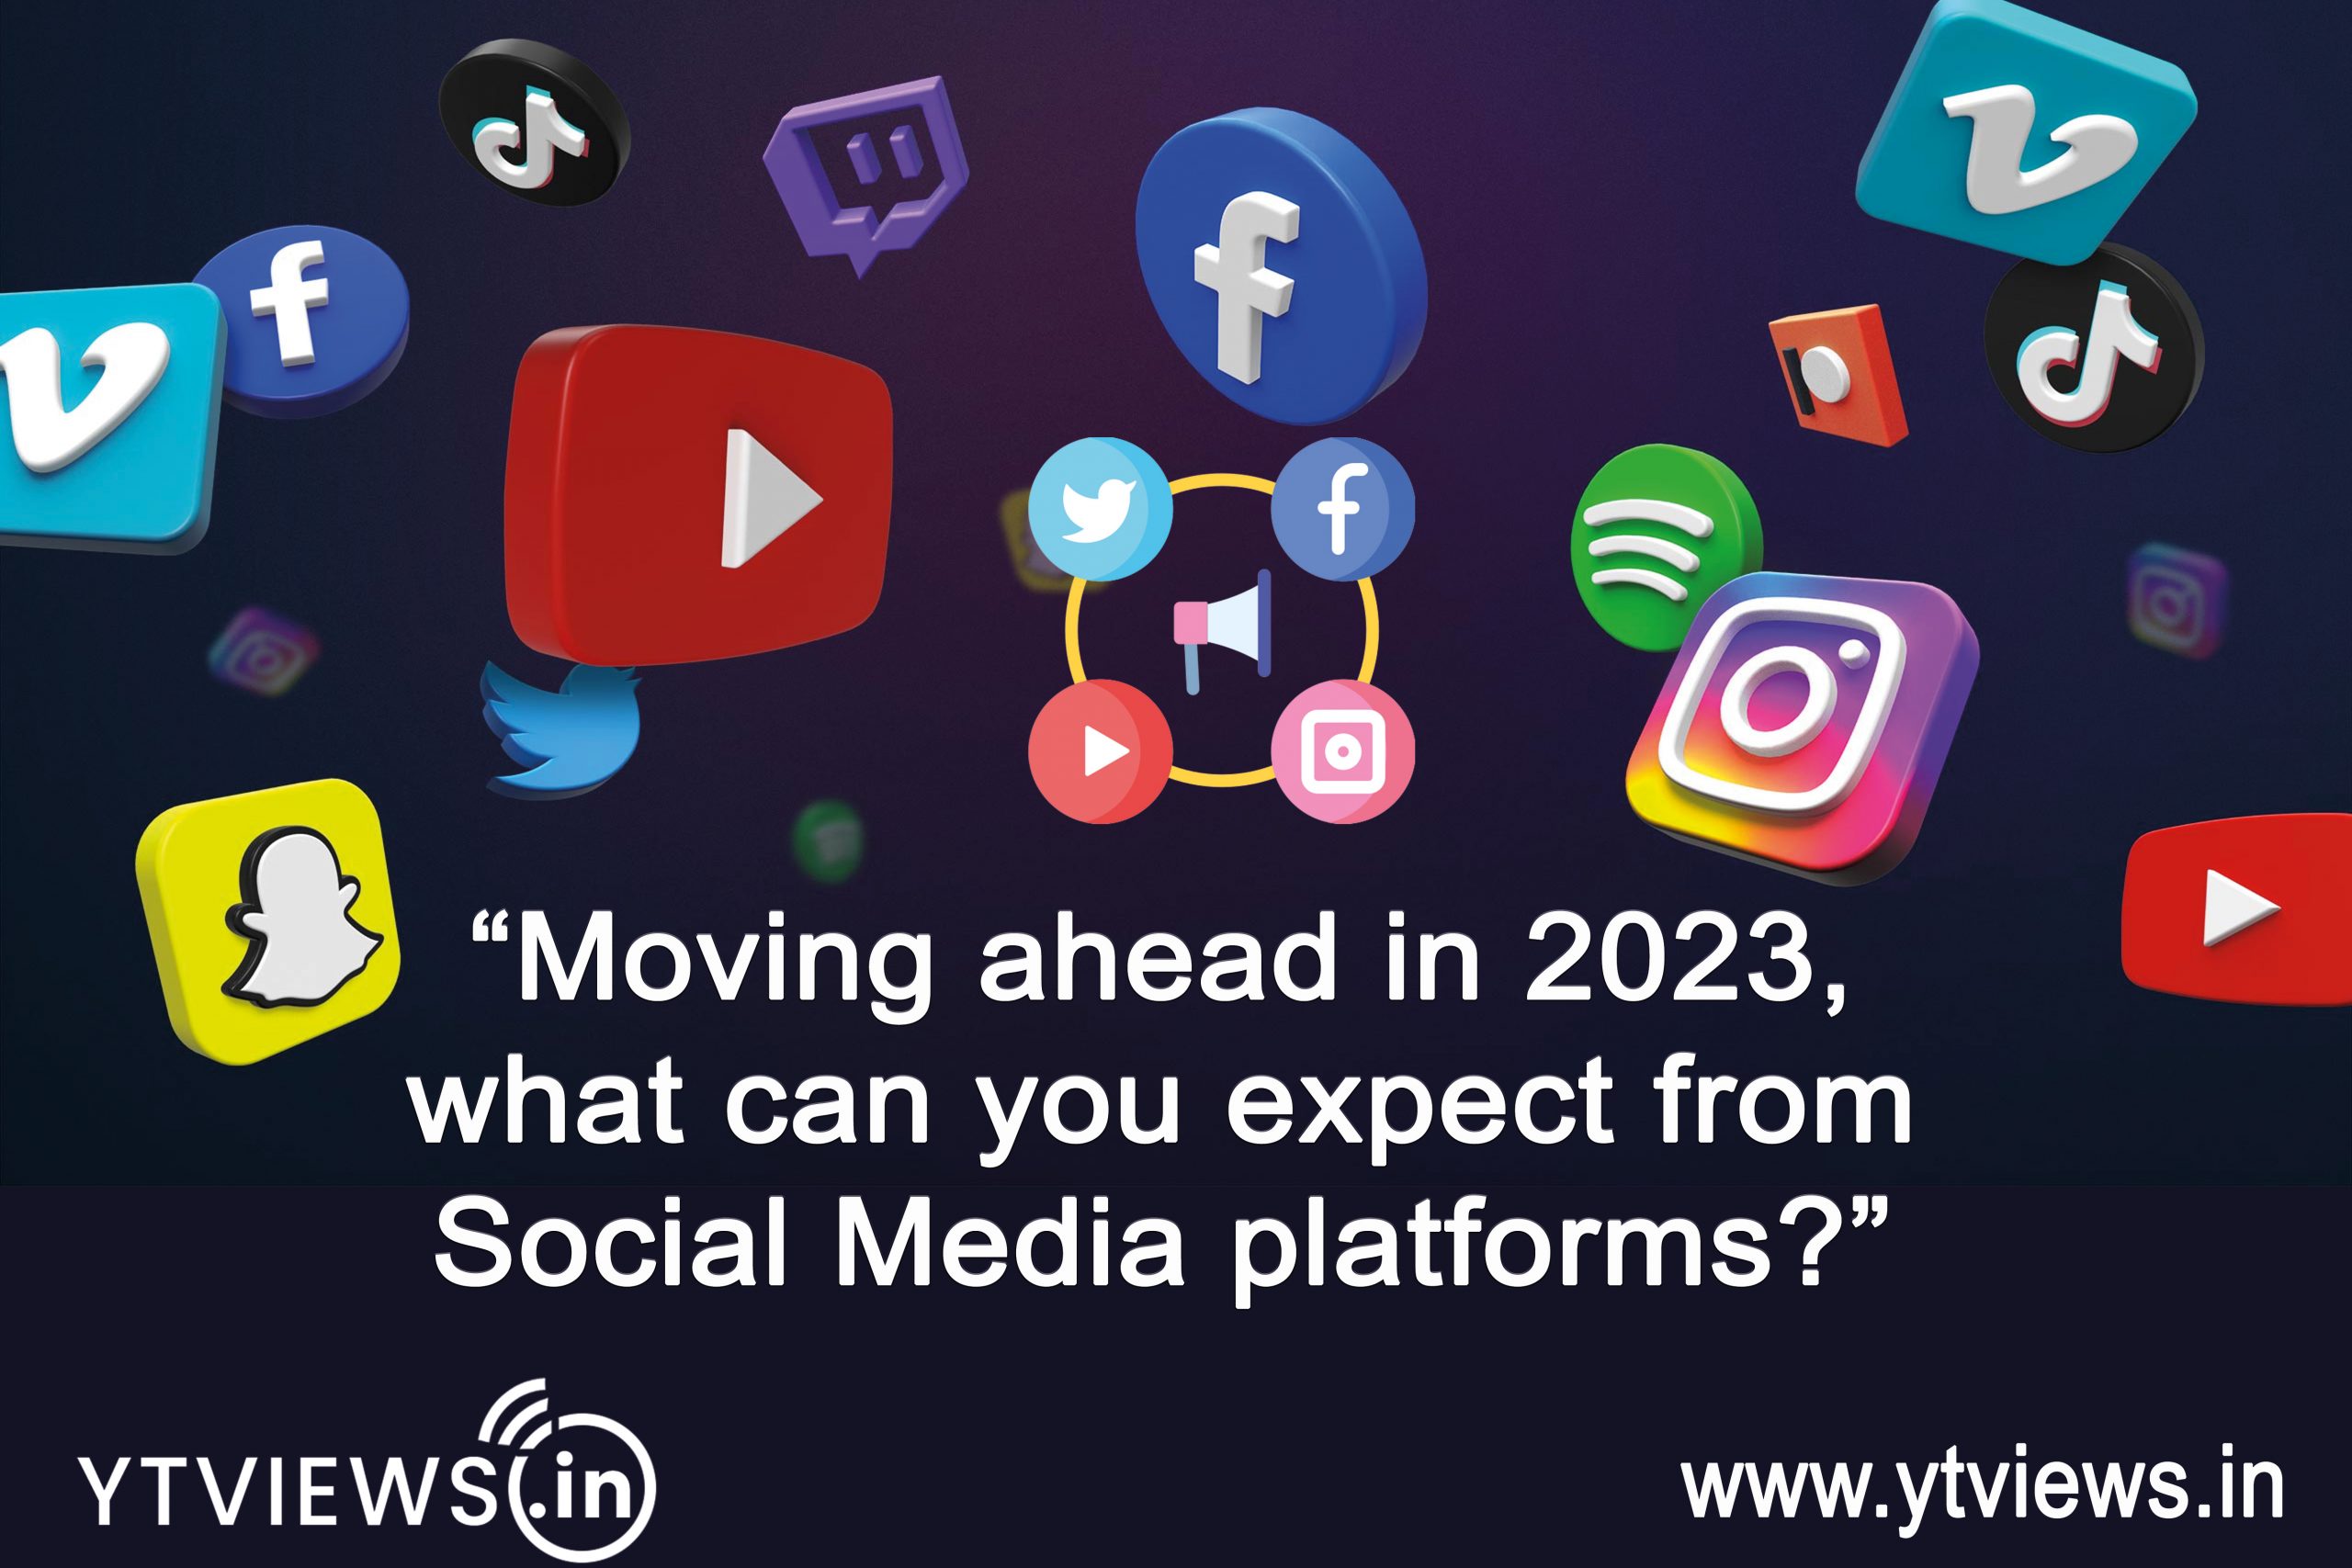 Moving ahead in 2023, what can you expect from social media platforms?